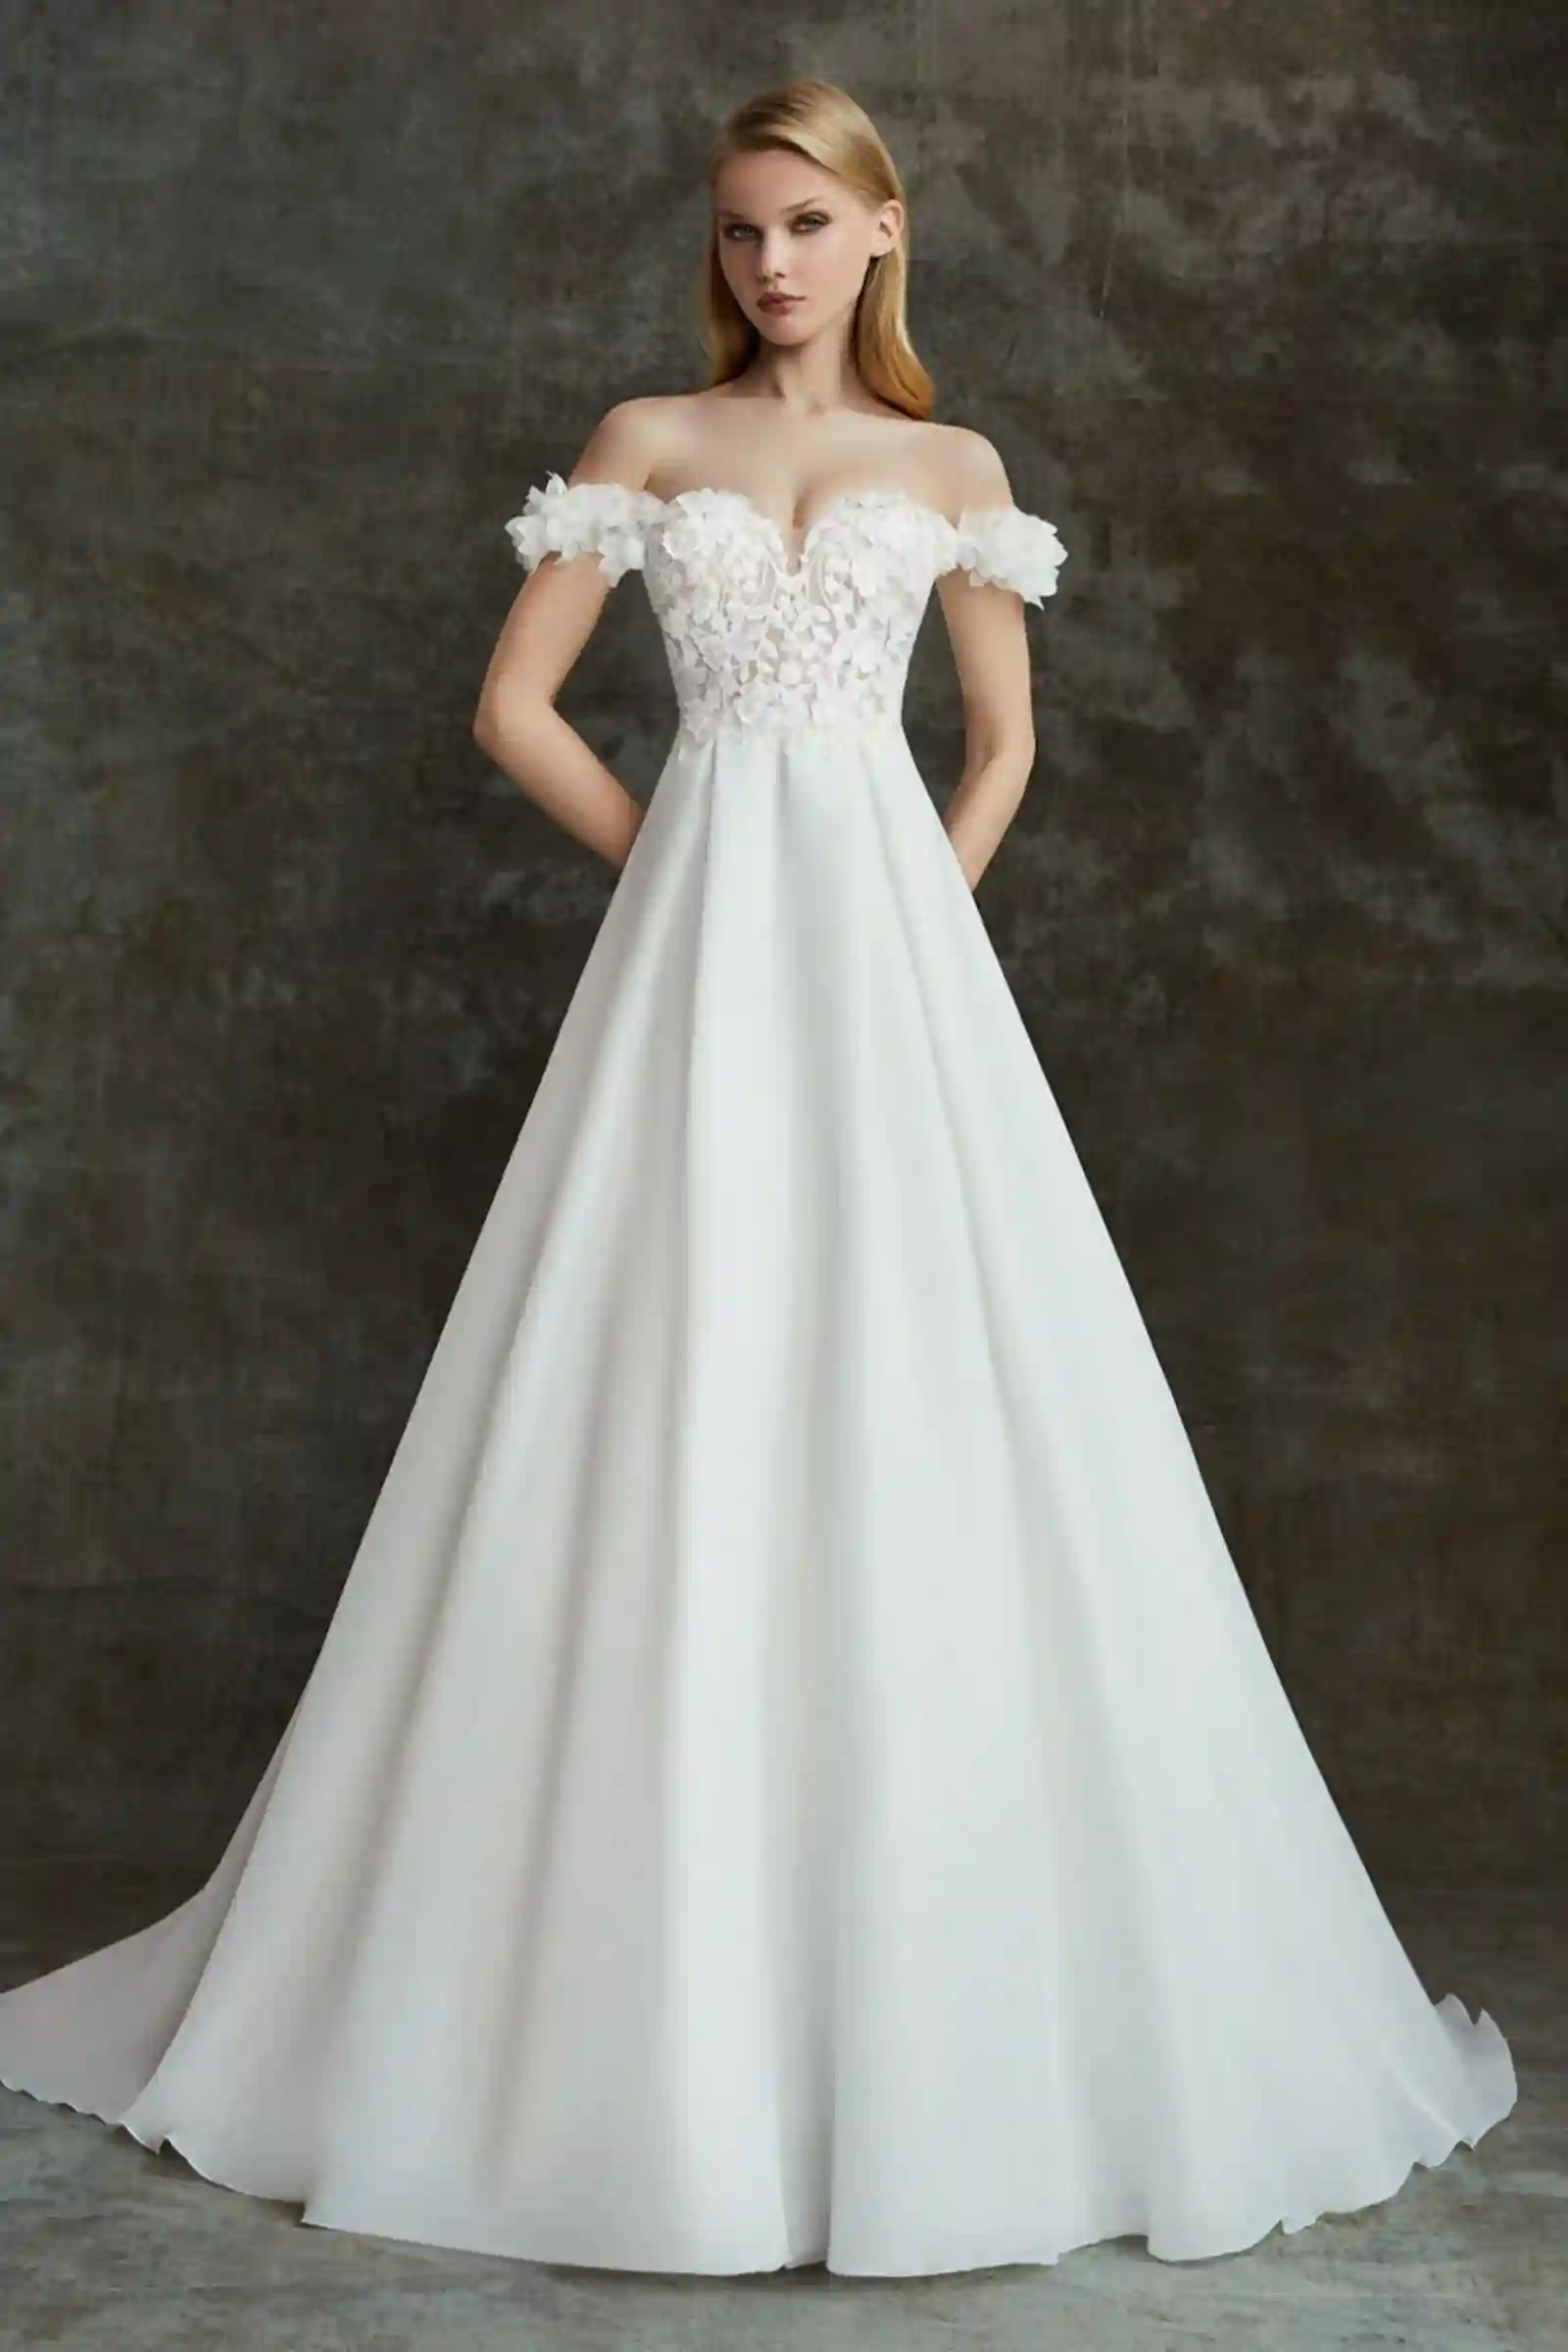 Featured image for “Brautkleid Betty”